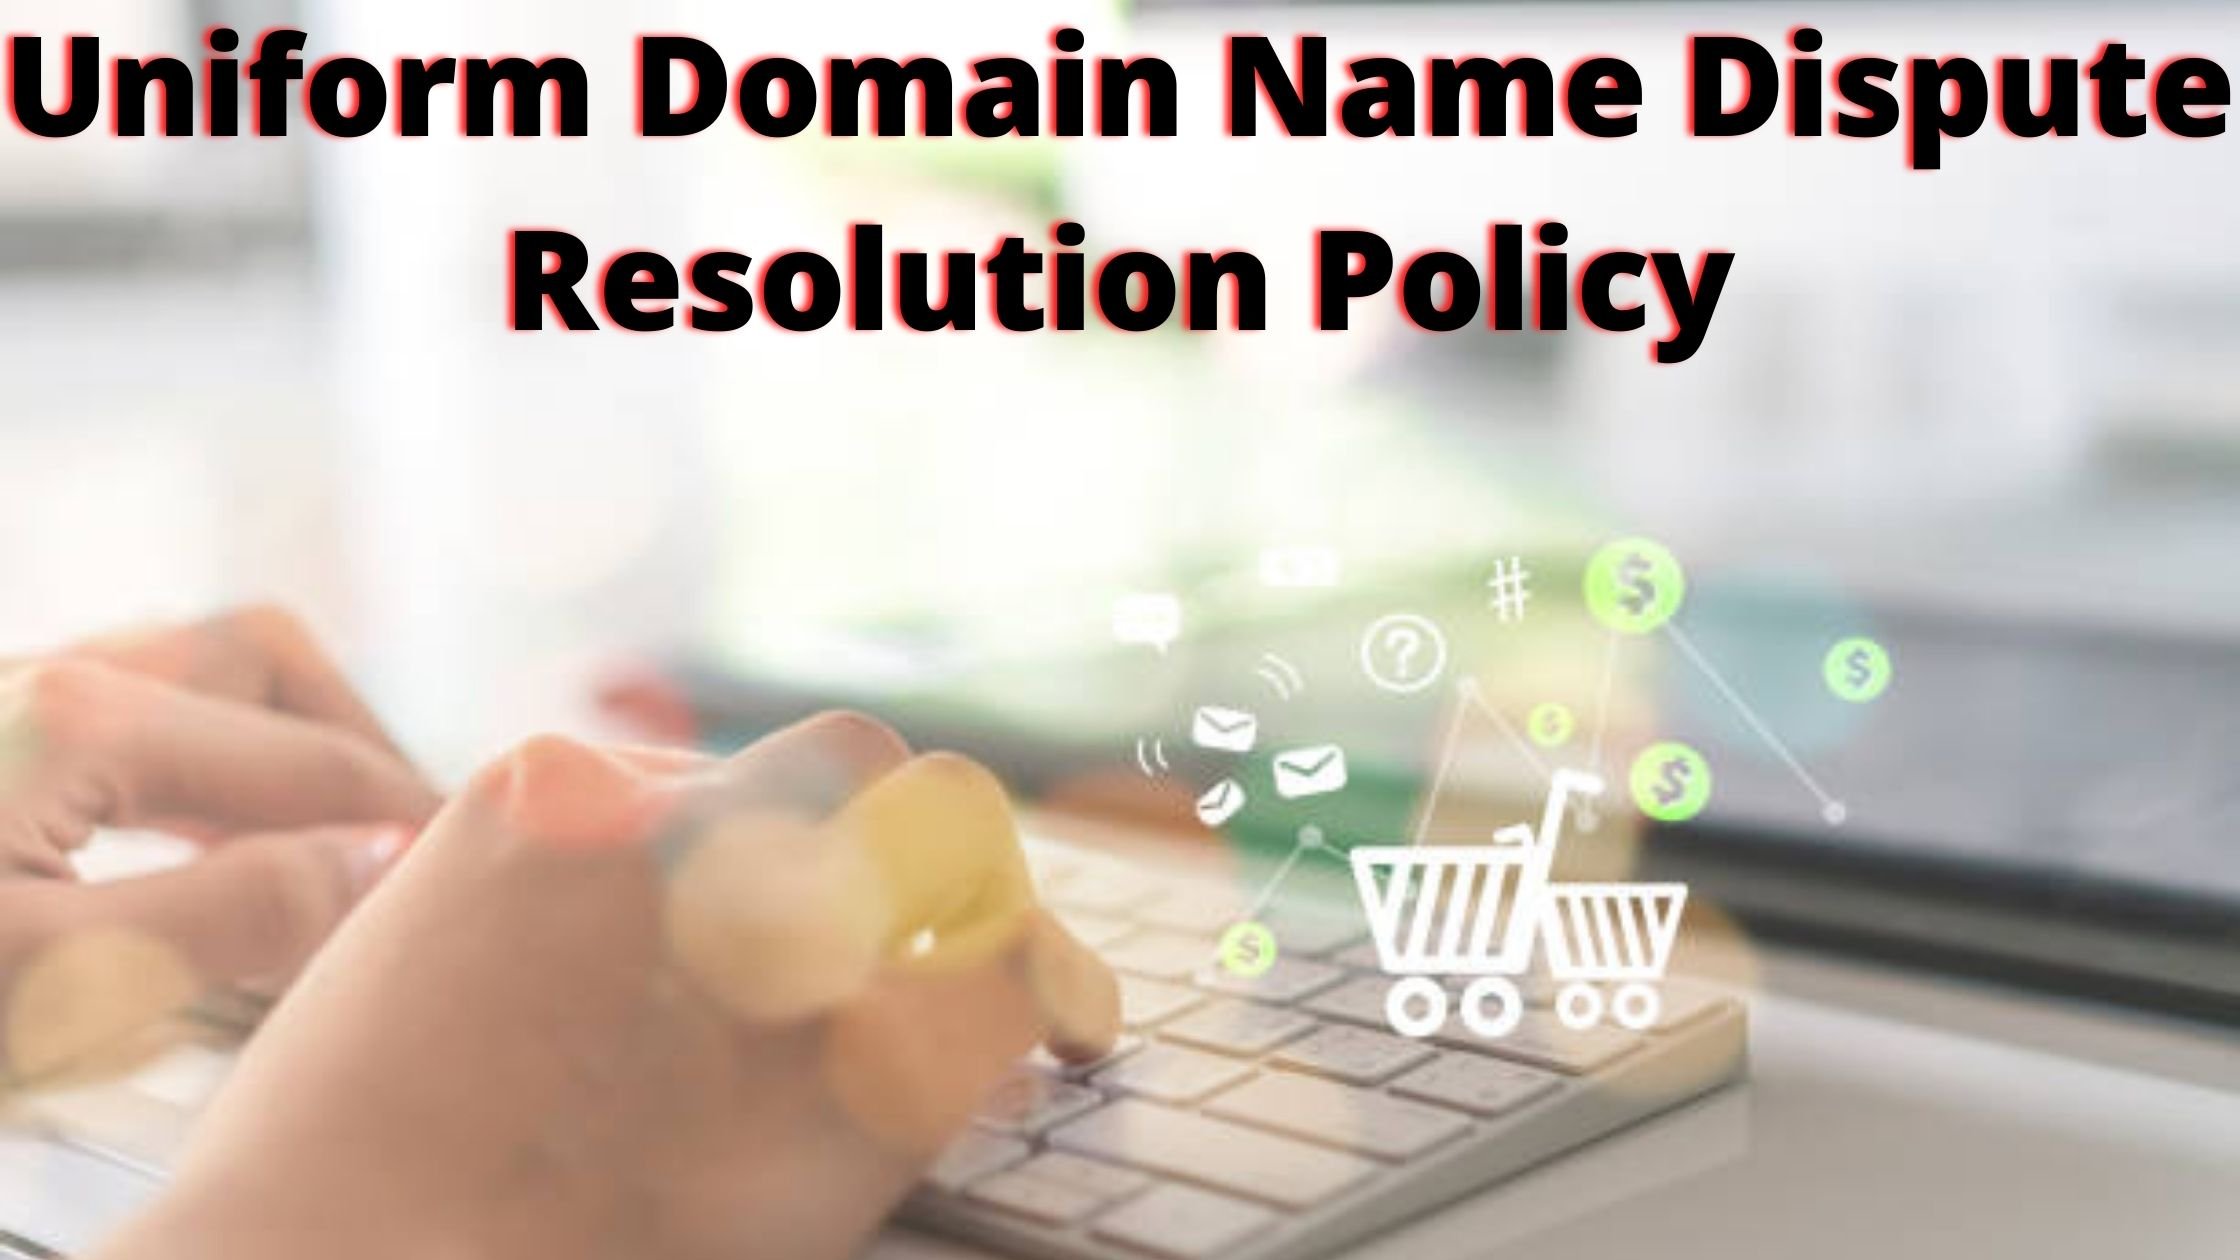 Uniform Domain Name Dispute Resolution Policy